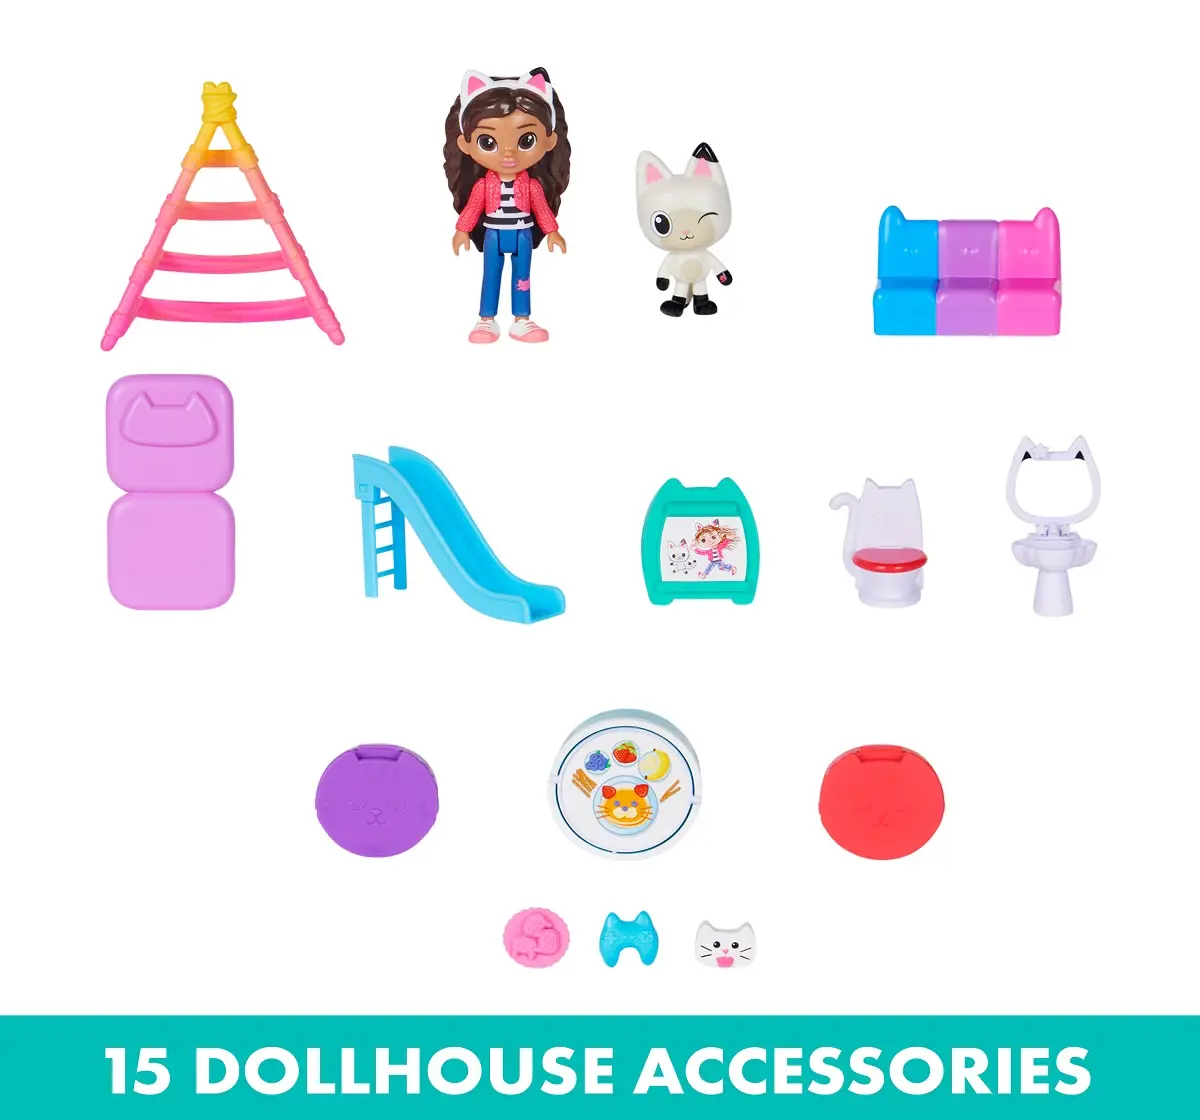 Gabbys Dollhouse, Purrfect Dollhouse with 2 Toy Figures, 8 Furniture Pieces, 3 Accessories, 2 Deliveries and Sounds, Kids Toys for Ages 3 and up